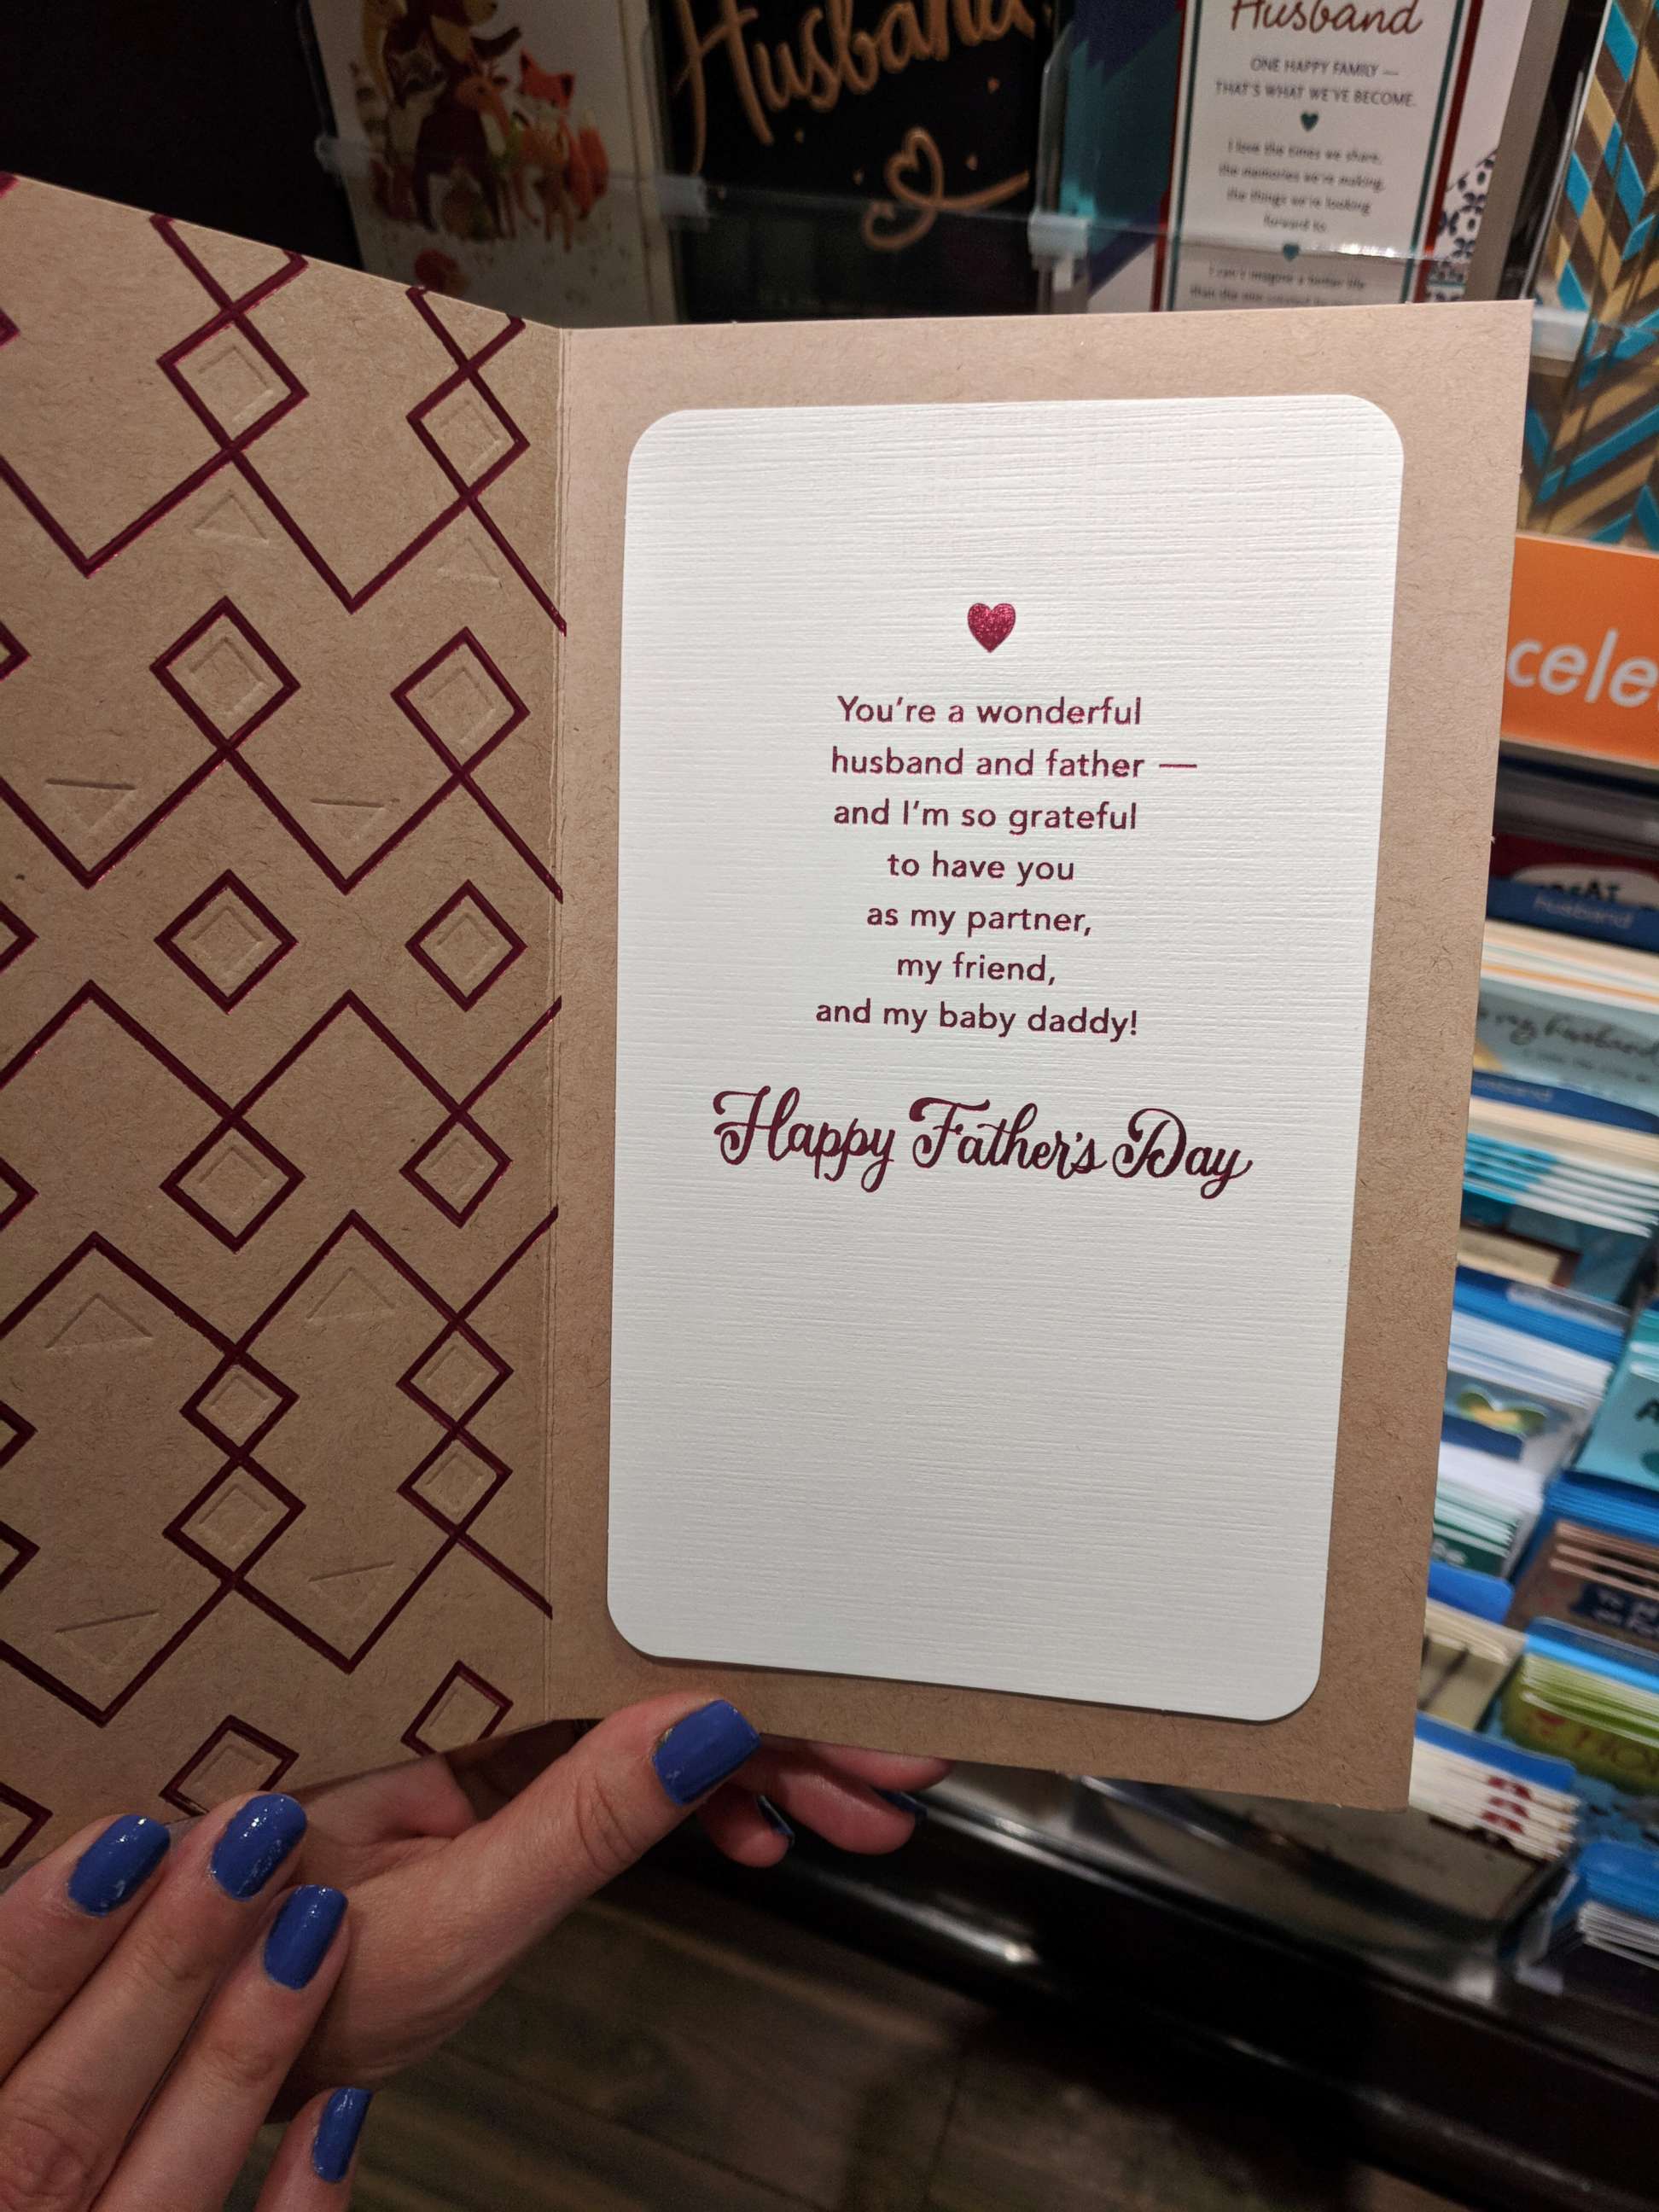 PHOTO: Target stores have pulled a Father's Day card, depicting a black couple and the words "Baby Daddy", from the shelves after getting complaints that it is racially insensitive.